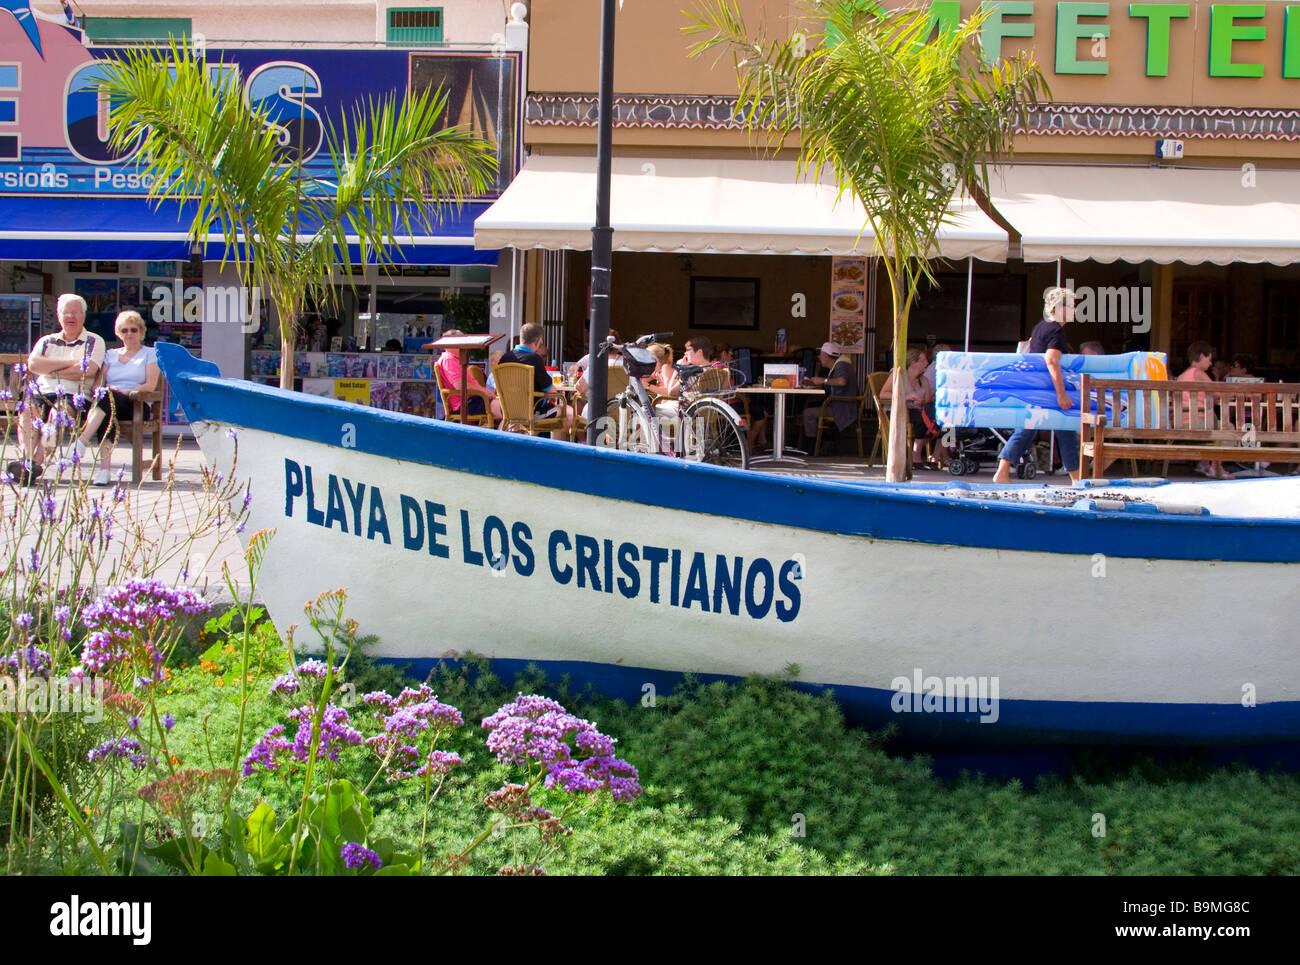 Feature traditional wooden fishing boat named 'Los Cristianos' lying on Los Cristianos beach Tenerife Canary Islands Spain Stock Photo